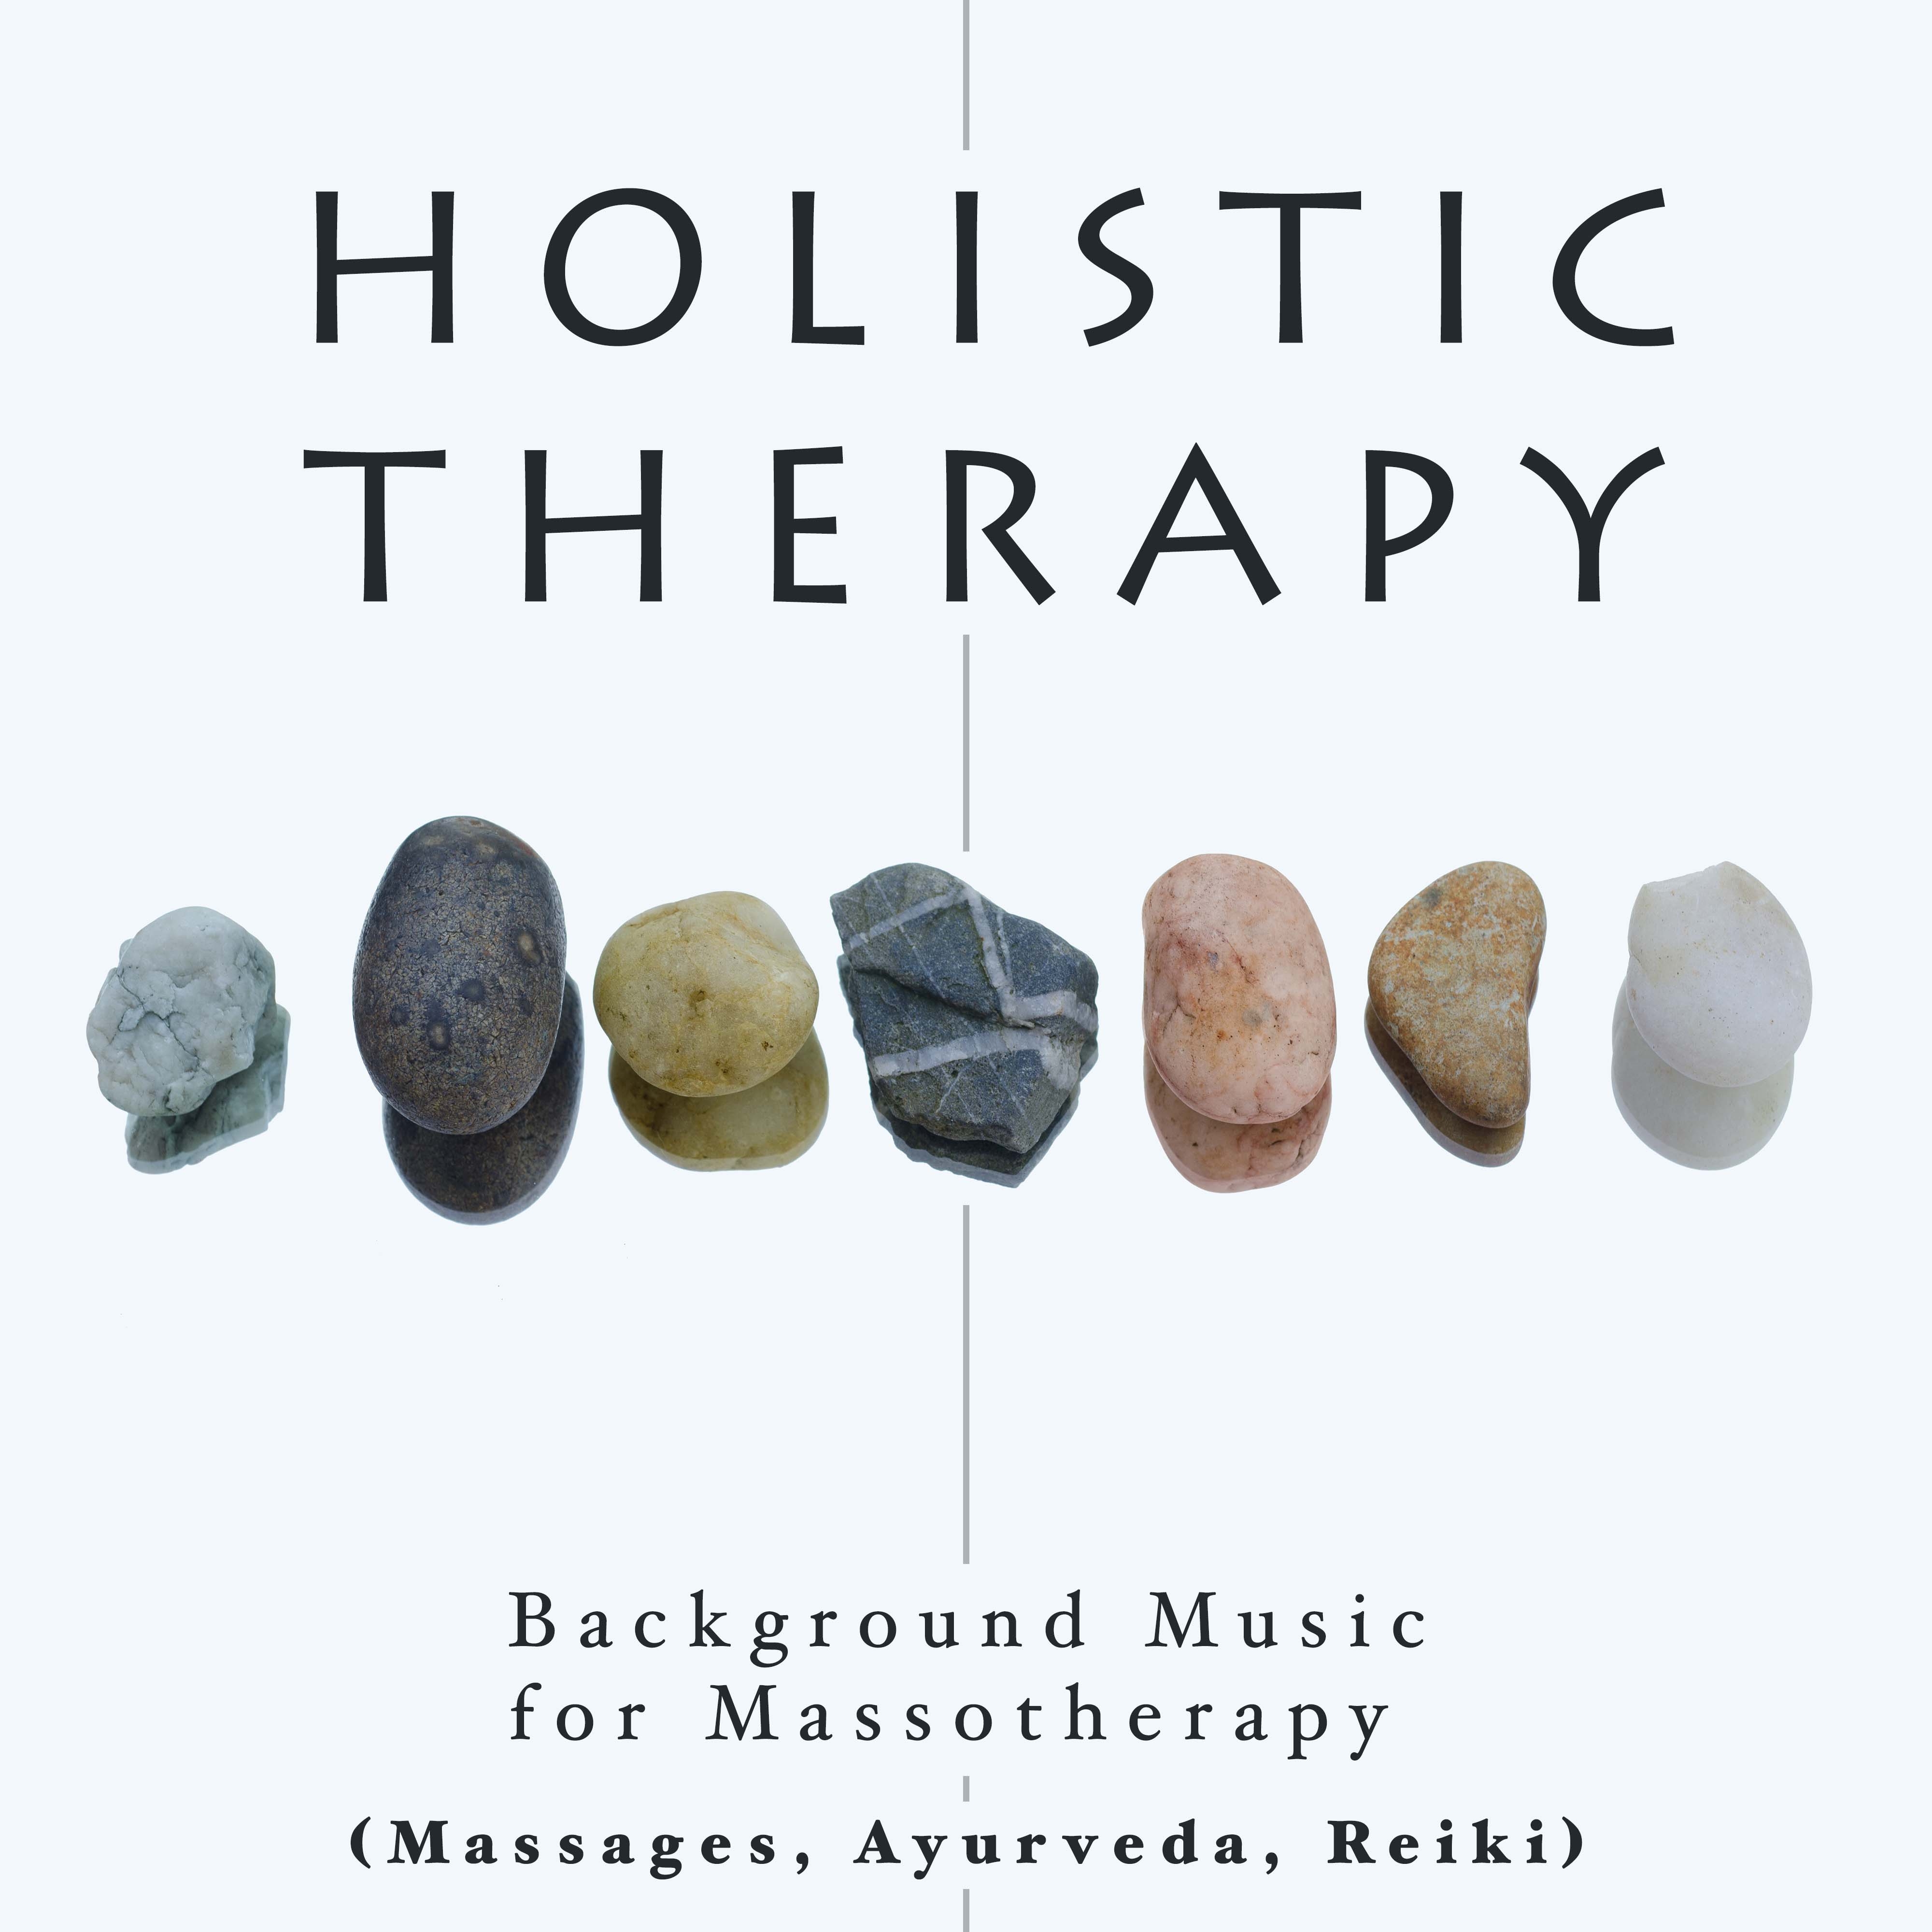 Holistic Therapy: Background Music for Massotherapy (Massages, Ayurveda, Reiki) with Relaxing Music and Nature Sounds